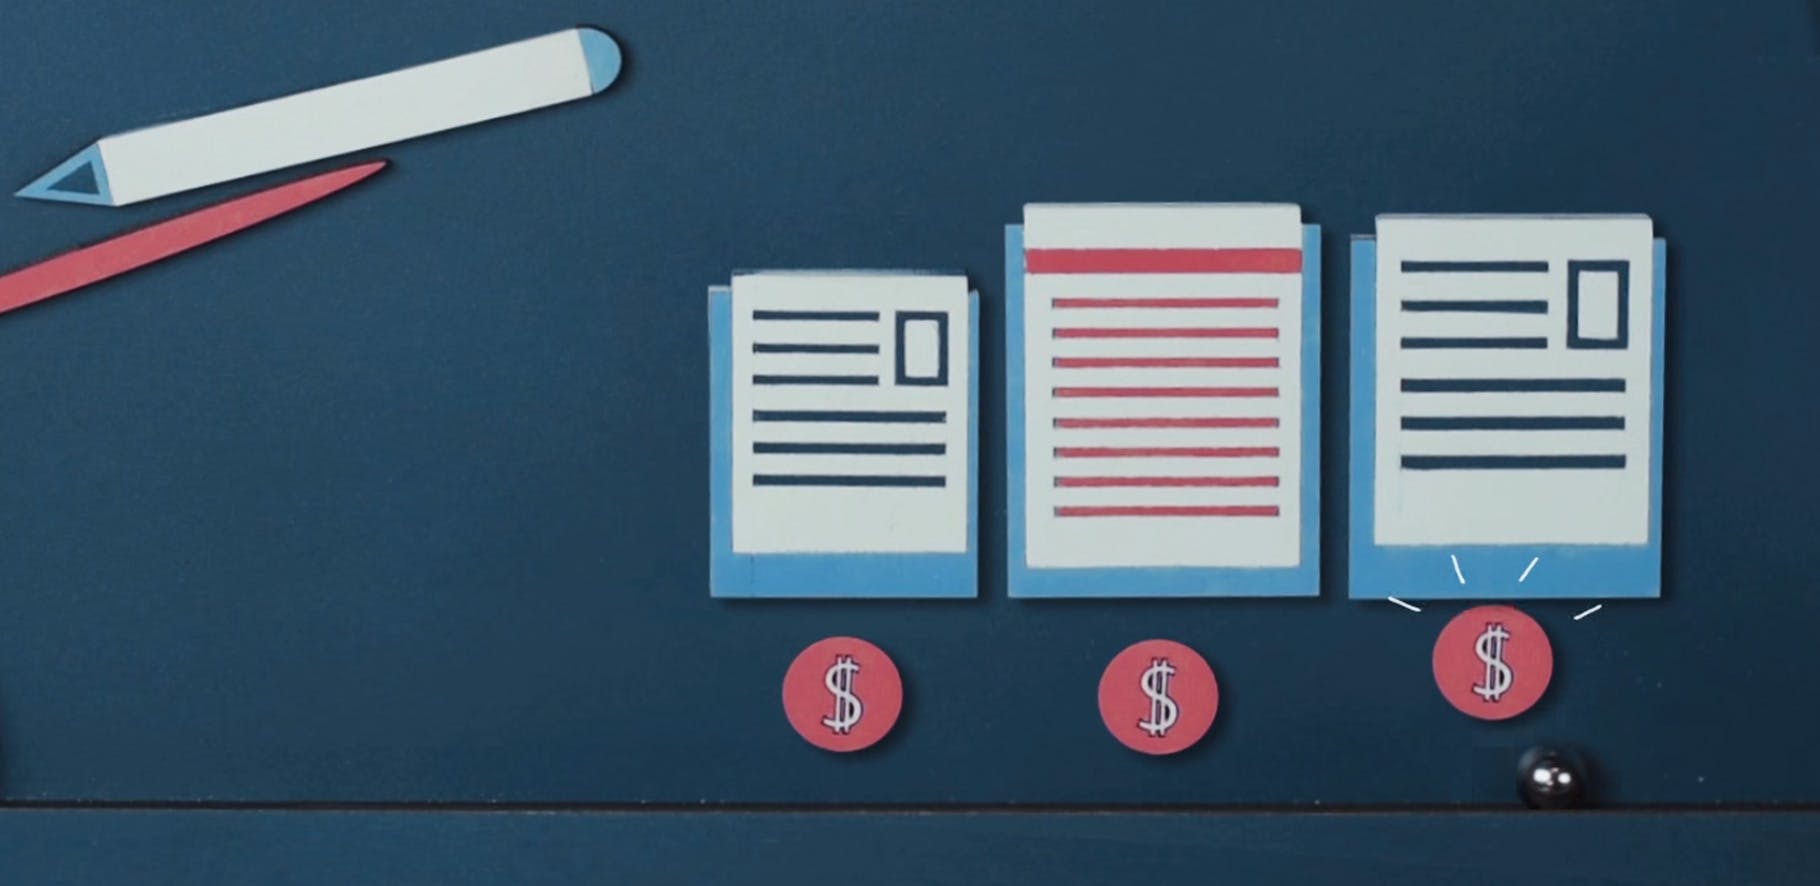 Illustration of different size files sitting on a desk with dollar sign symbols underneath